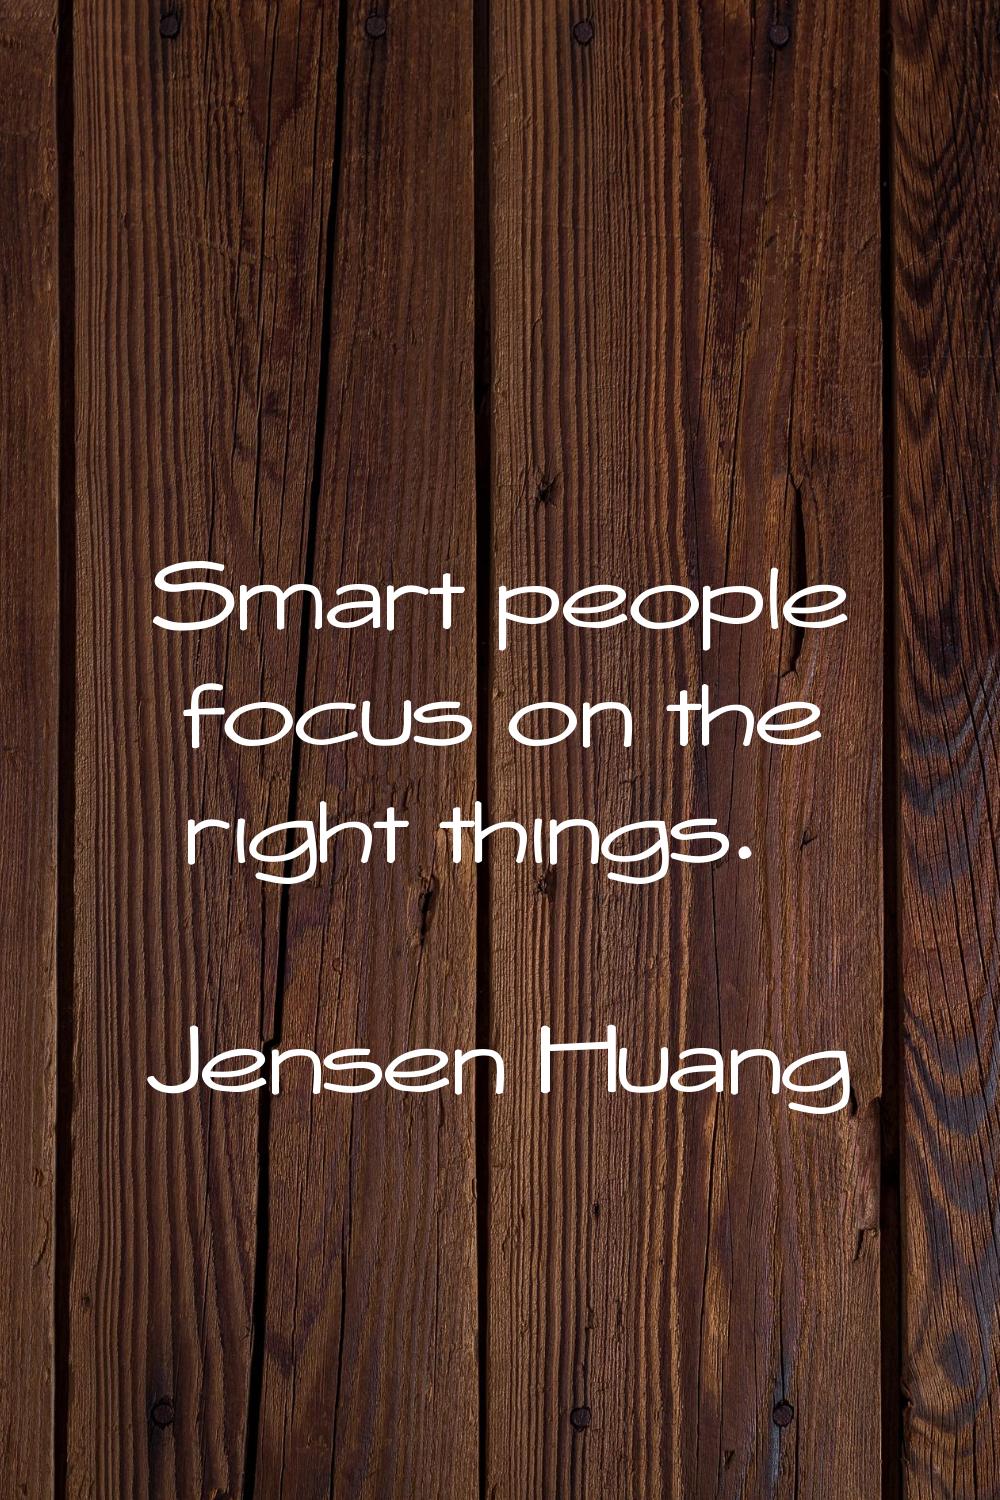 Smart people focus on the right things.